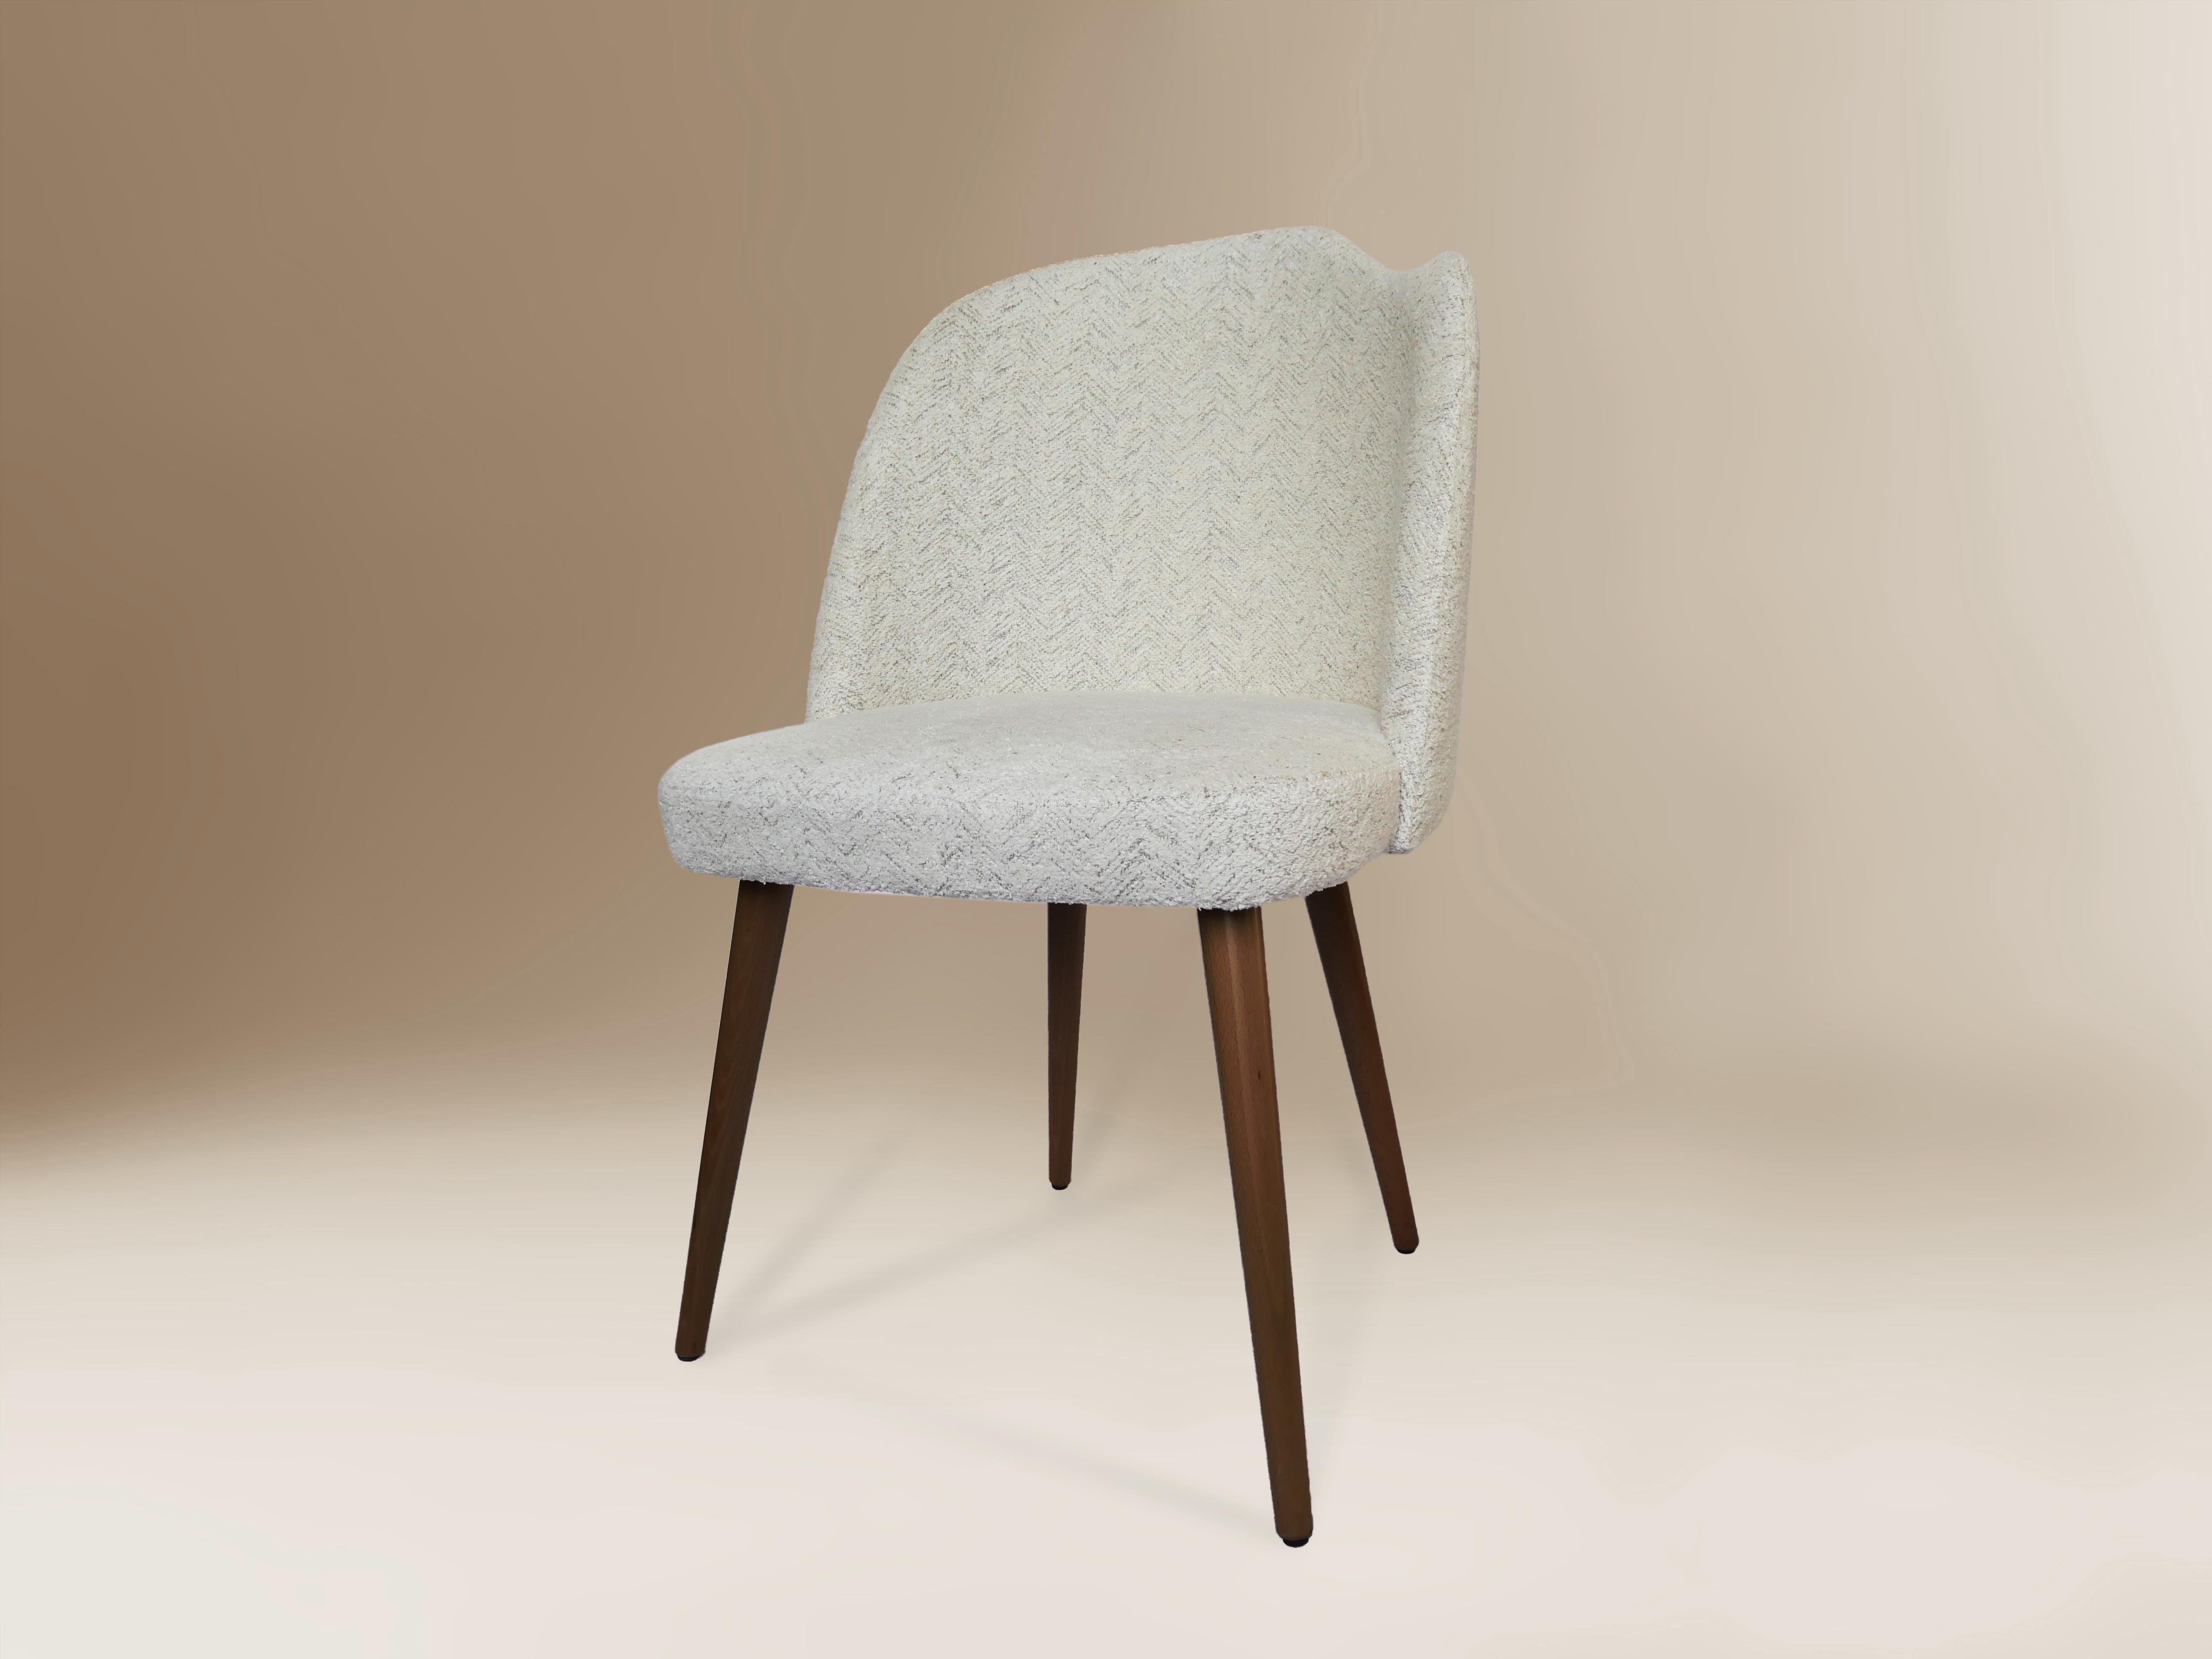 The Yves chair is a piece created by the prestigious Spanish designer Sergio Prieto for Dovain Studio. Its shapes and materials allow it to adapt to any environment, from a classic space to something contemporary and fresh. Both the fabric and the